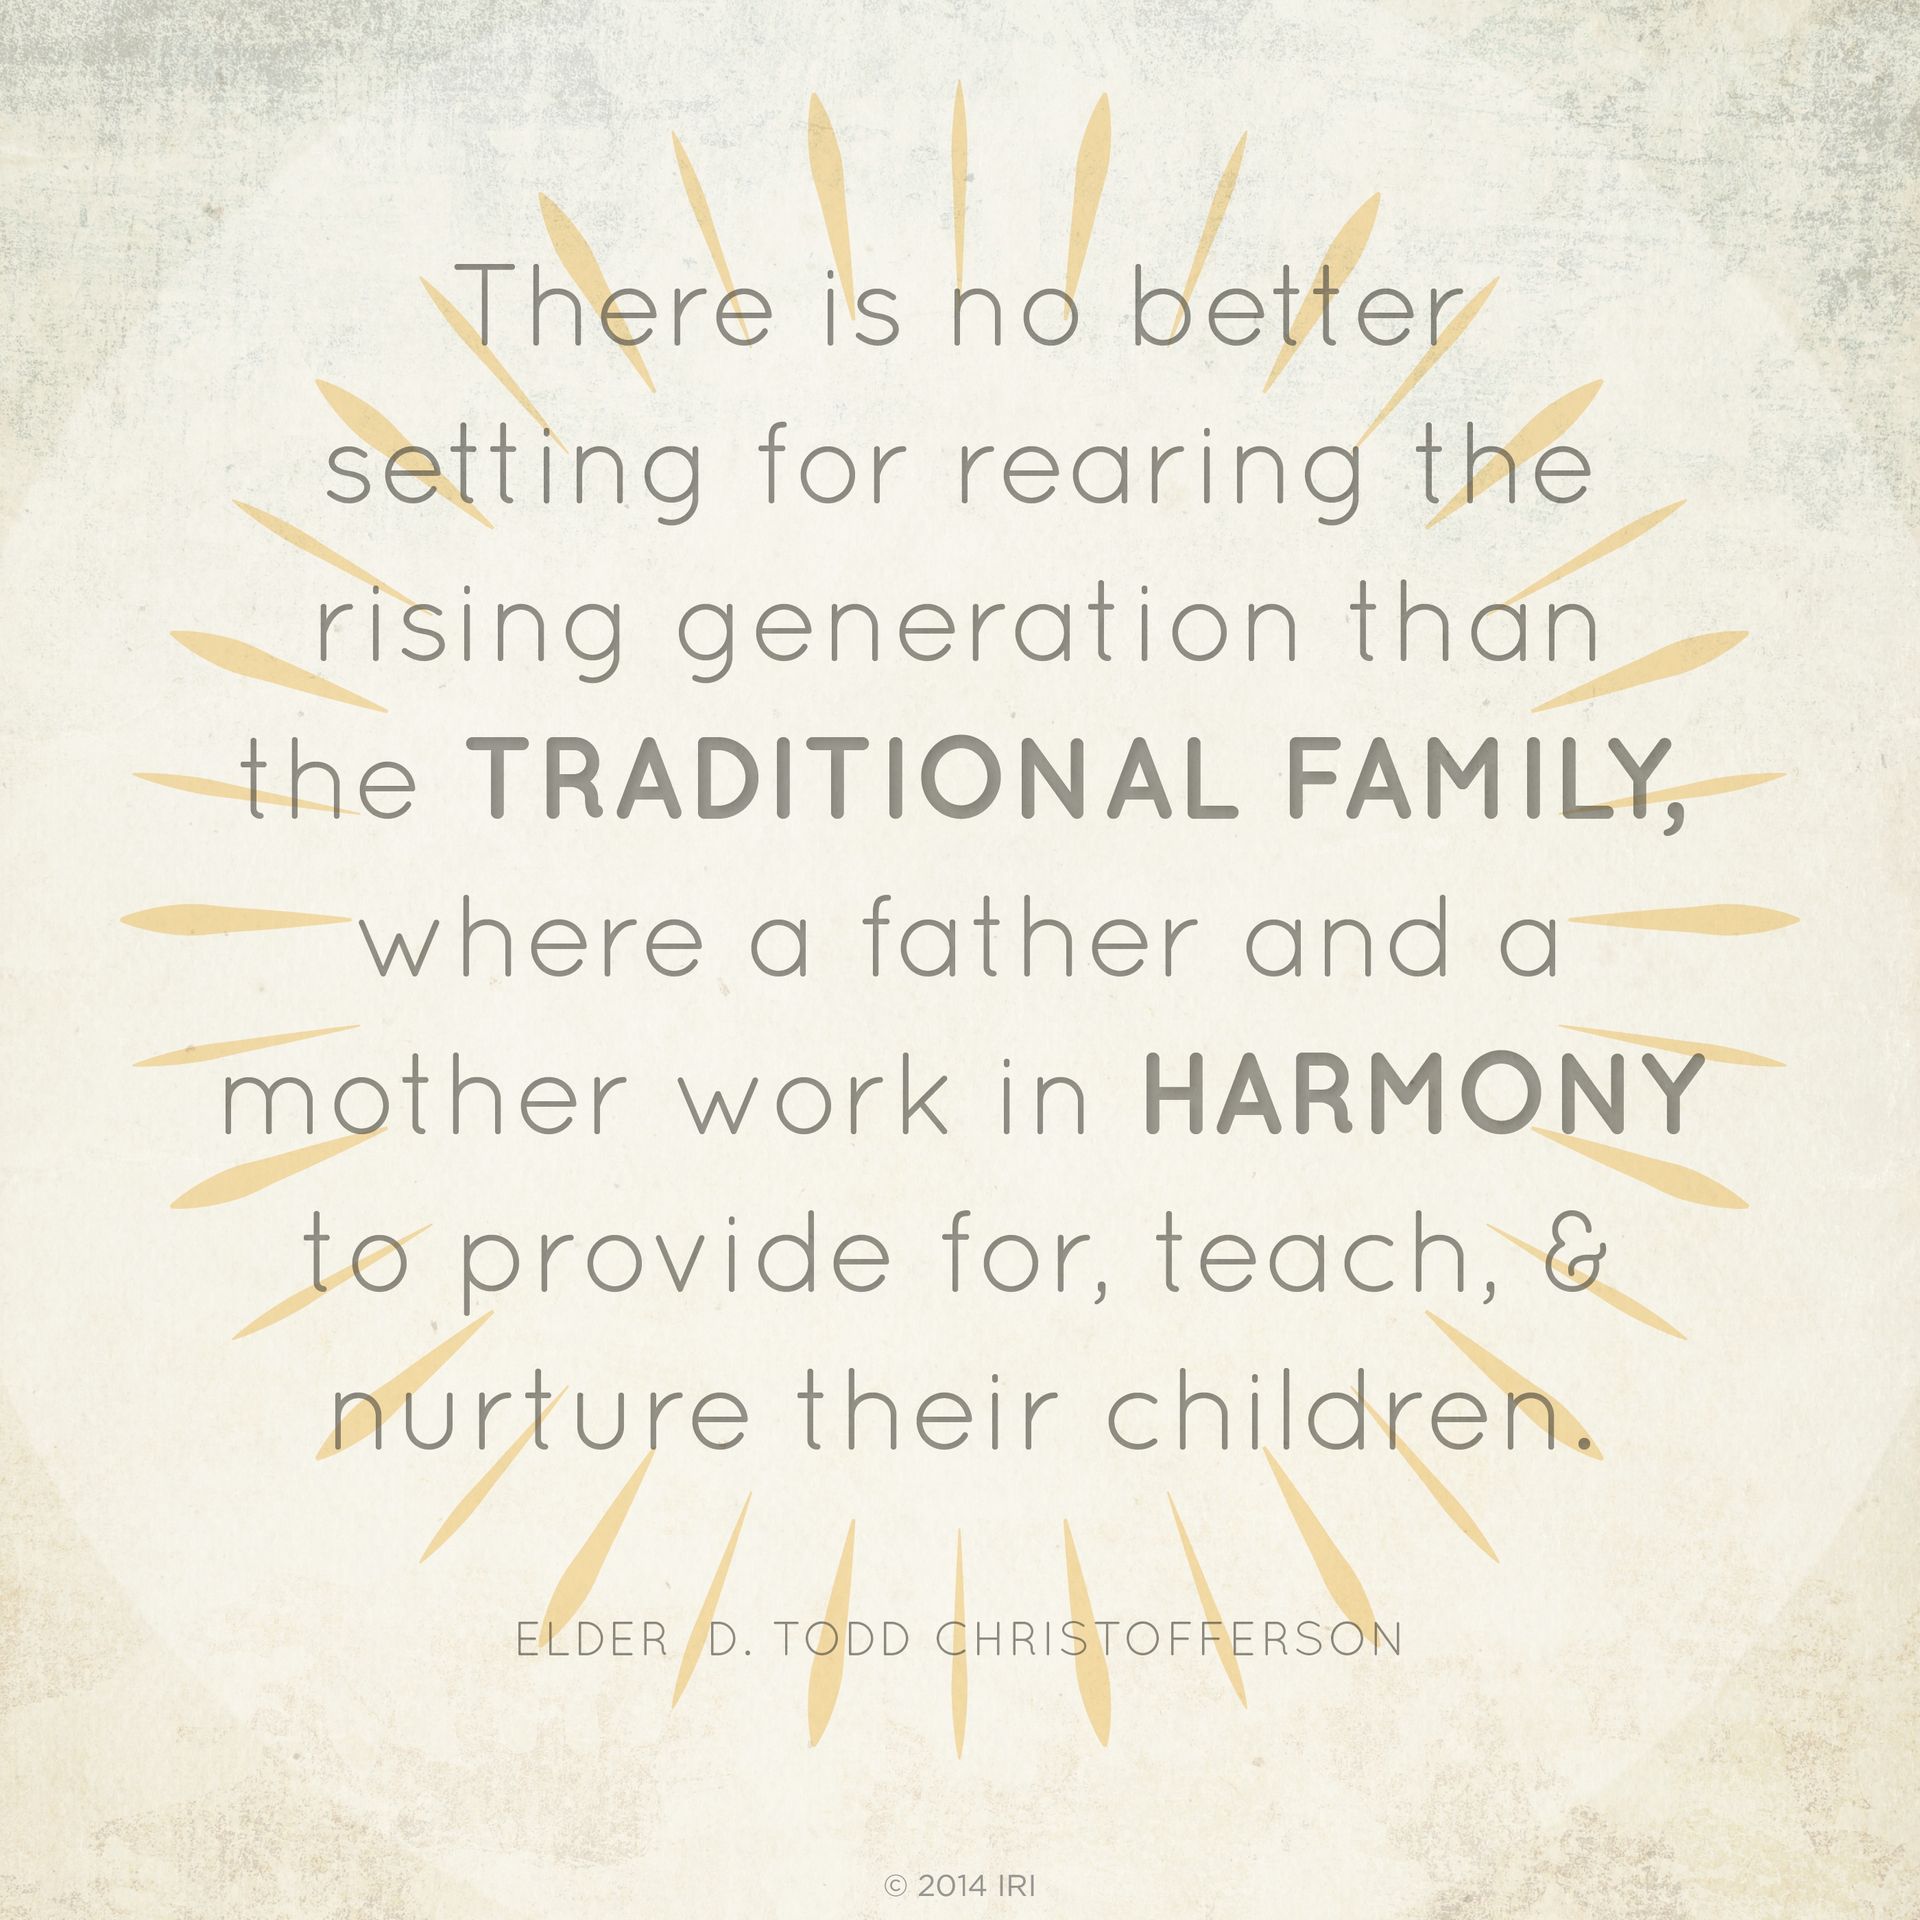 “There is no better setting for rearing the rising generation than the traditional family, where a father and a mother work in harmony to provide for, teach, and nurture their children.”—Elder D. Todd Christofferson, “The Moral Force of Women”